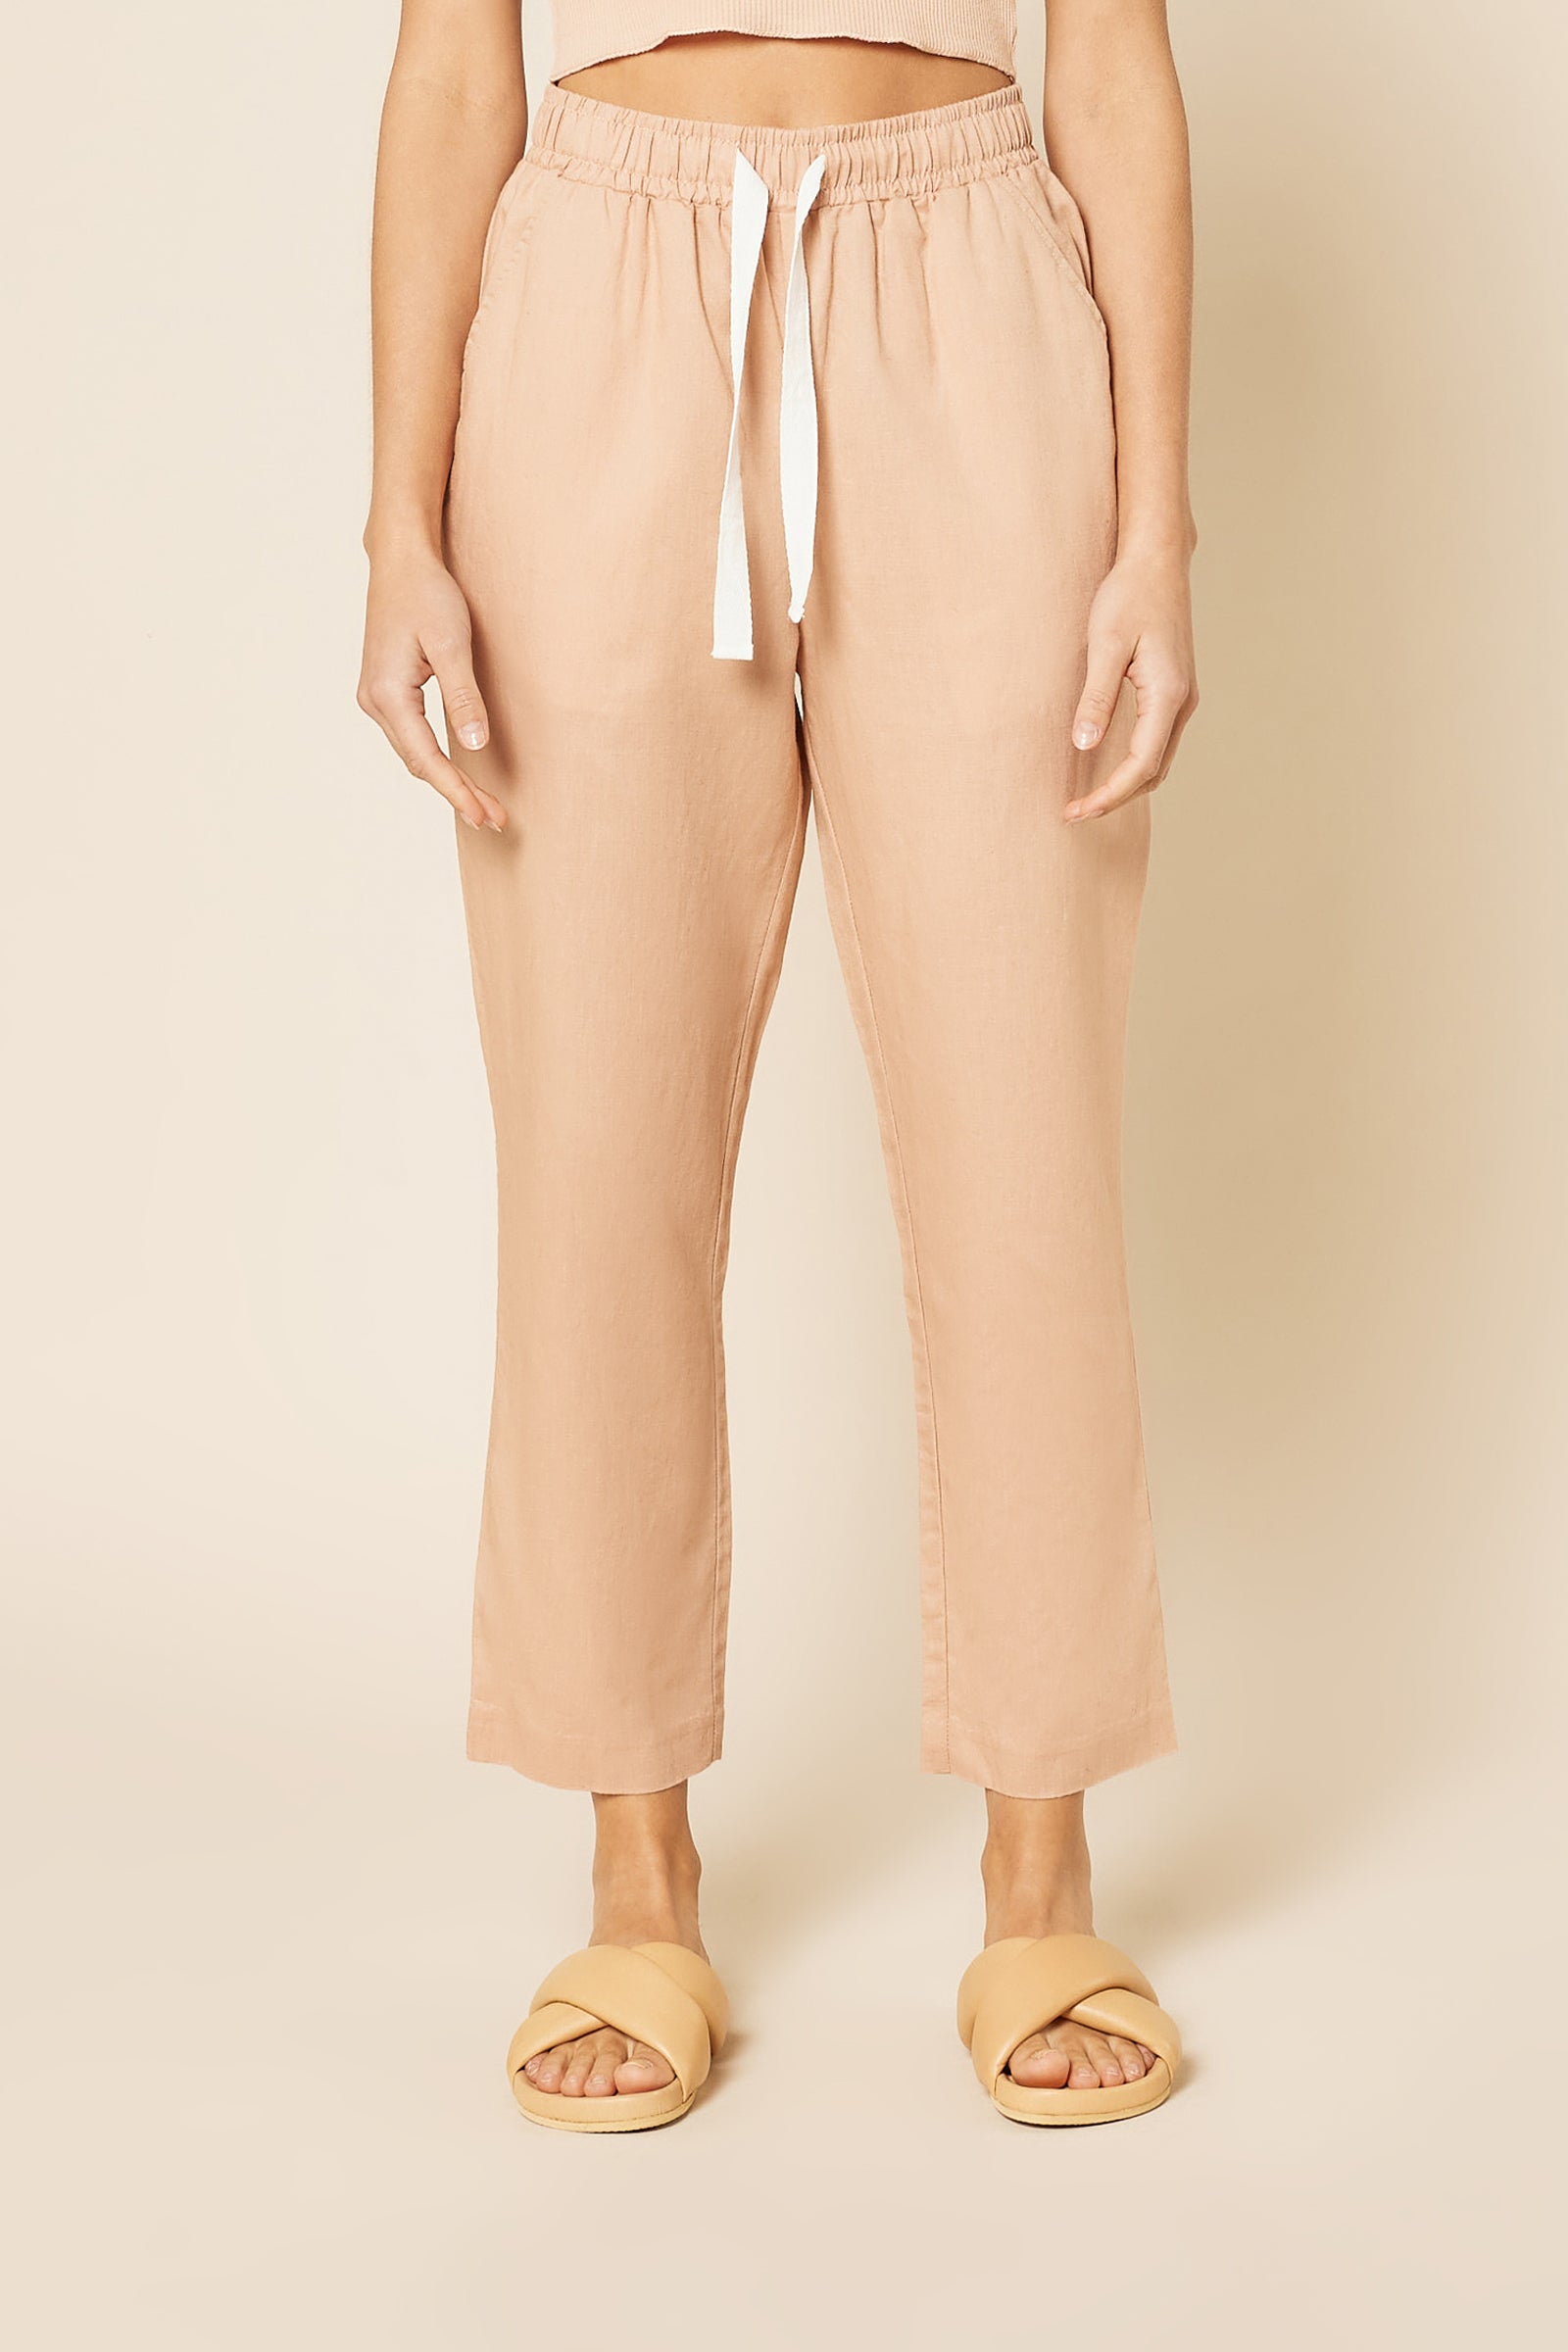 Nude Lucy Nude Classic Pant In a Orange Clay Colour